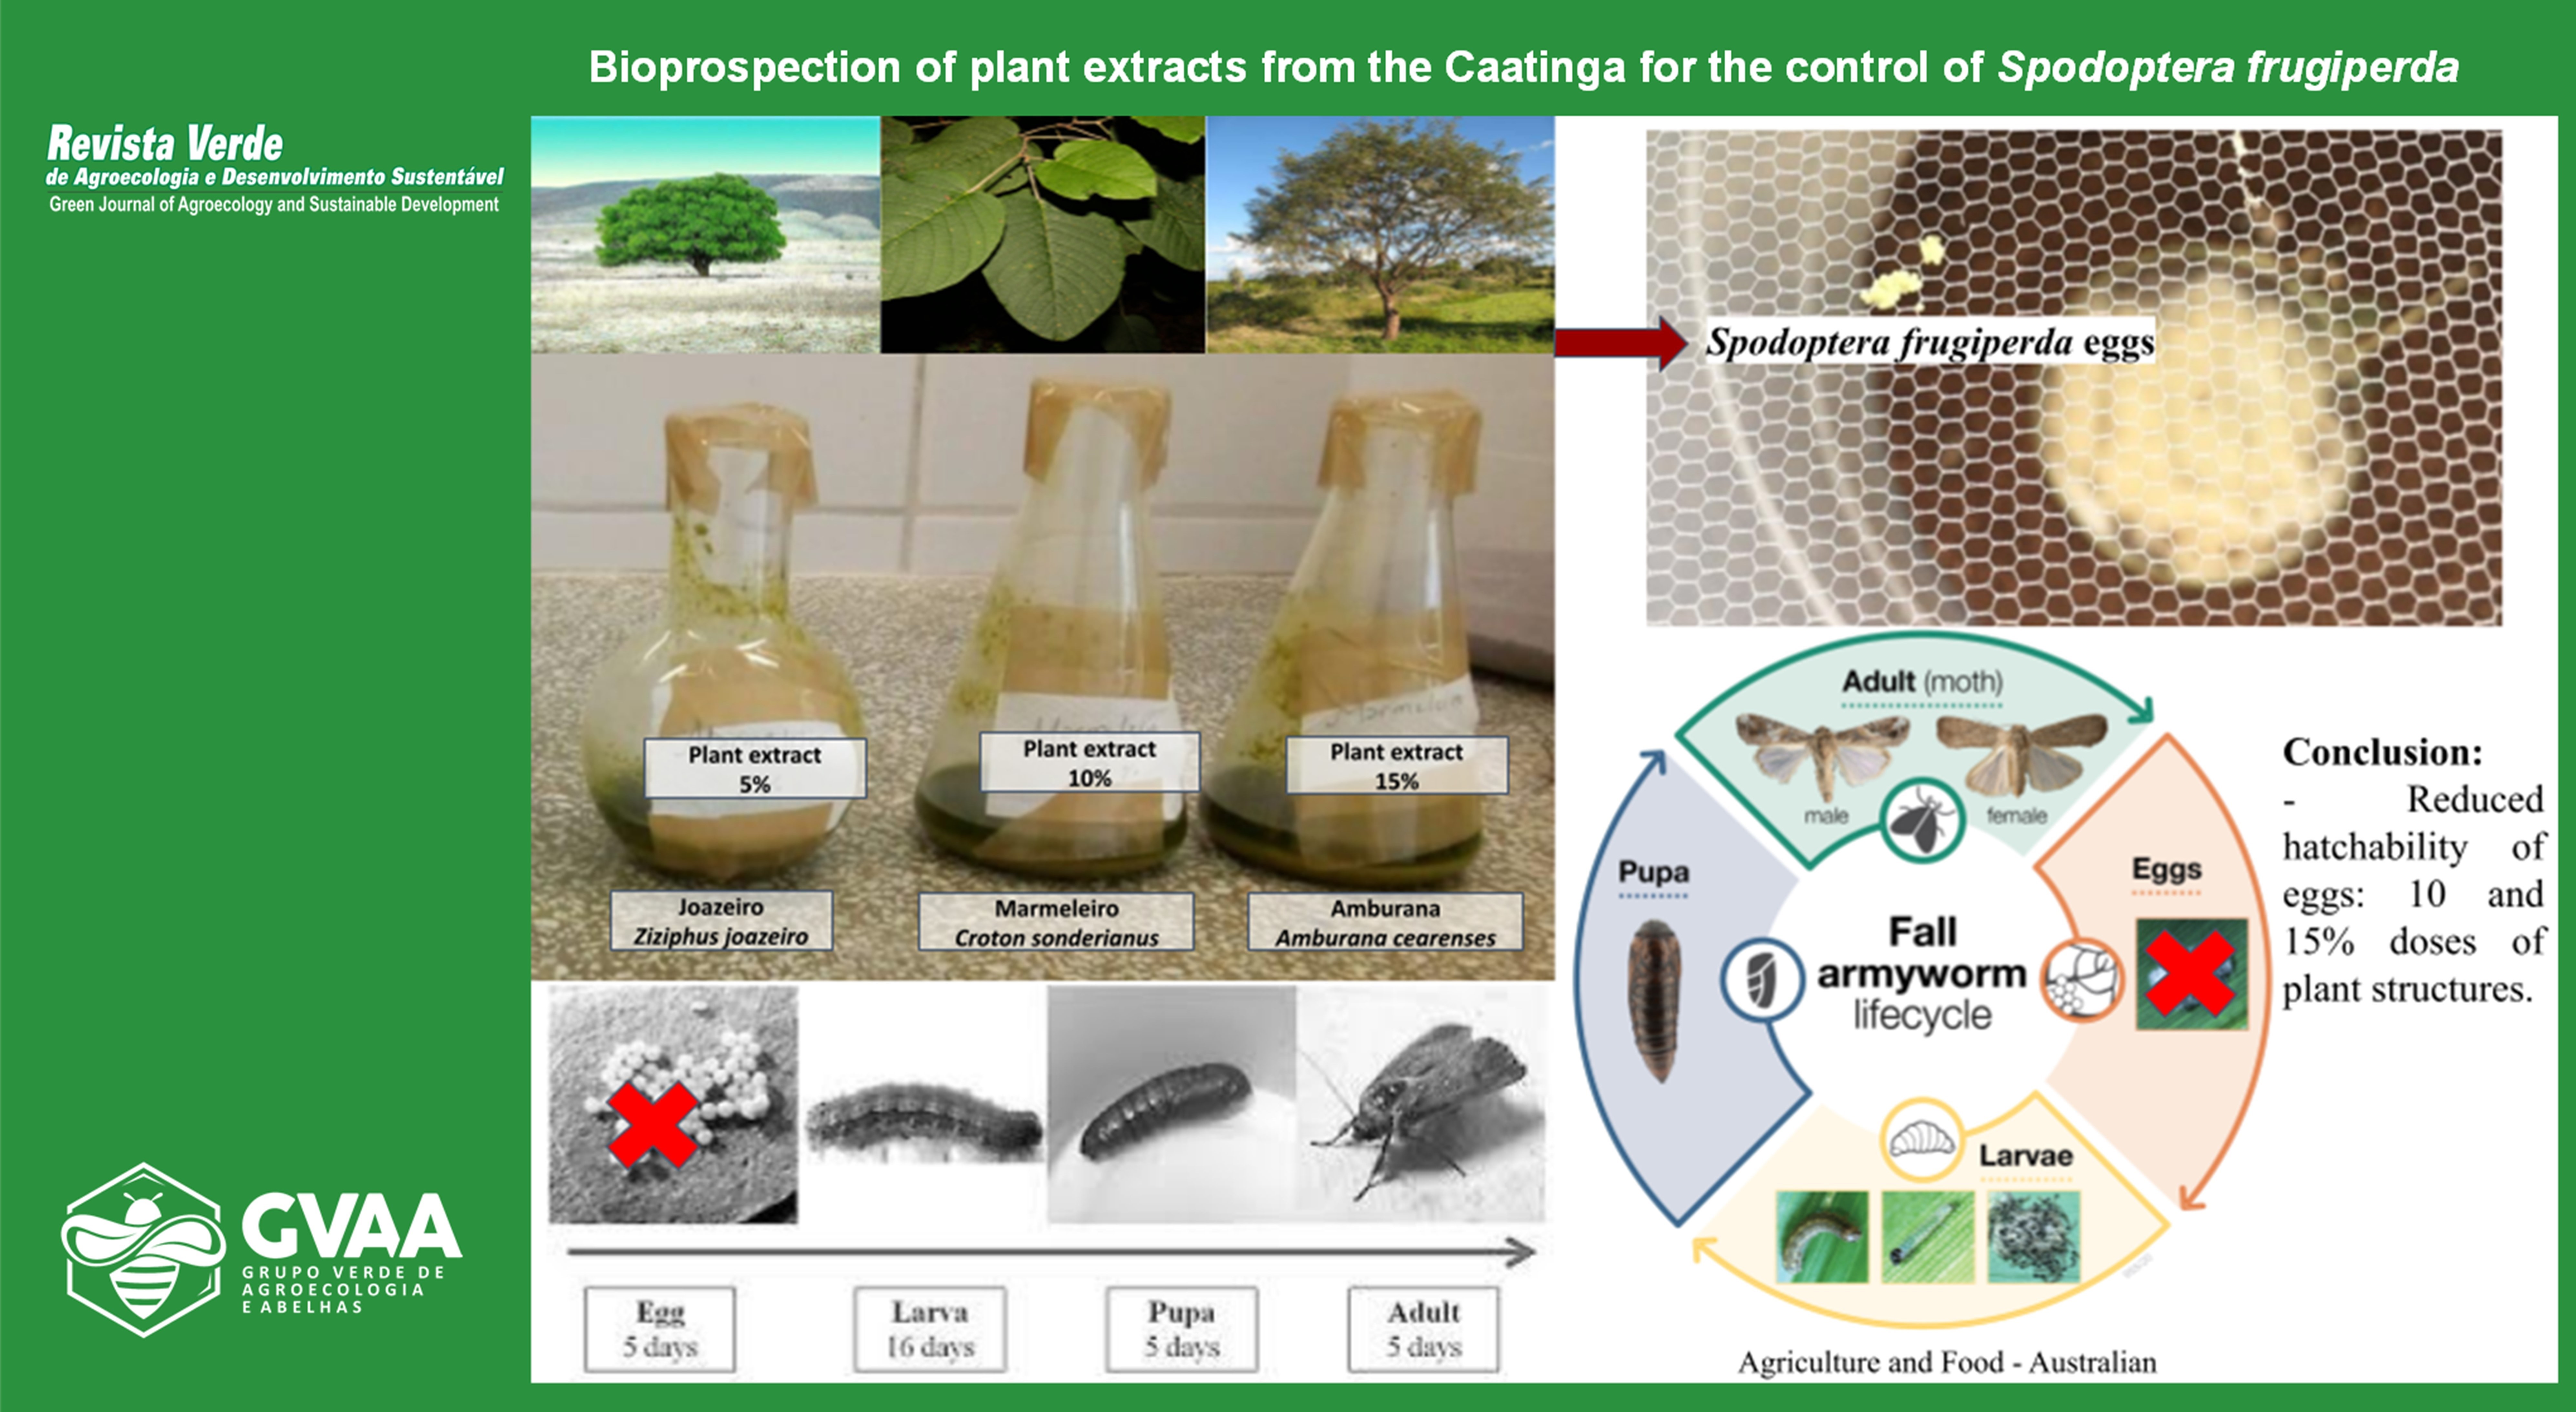 Bioprospection of plant extracts from the Caatinga for the control of Spodoptera frugiperda